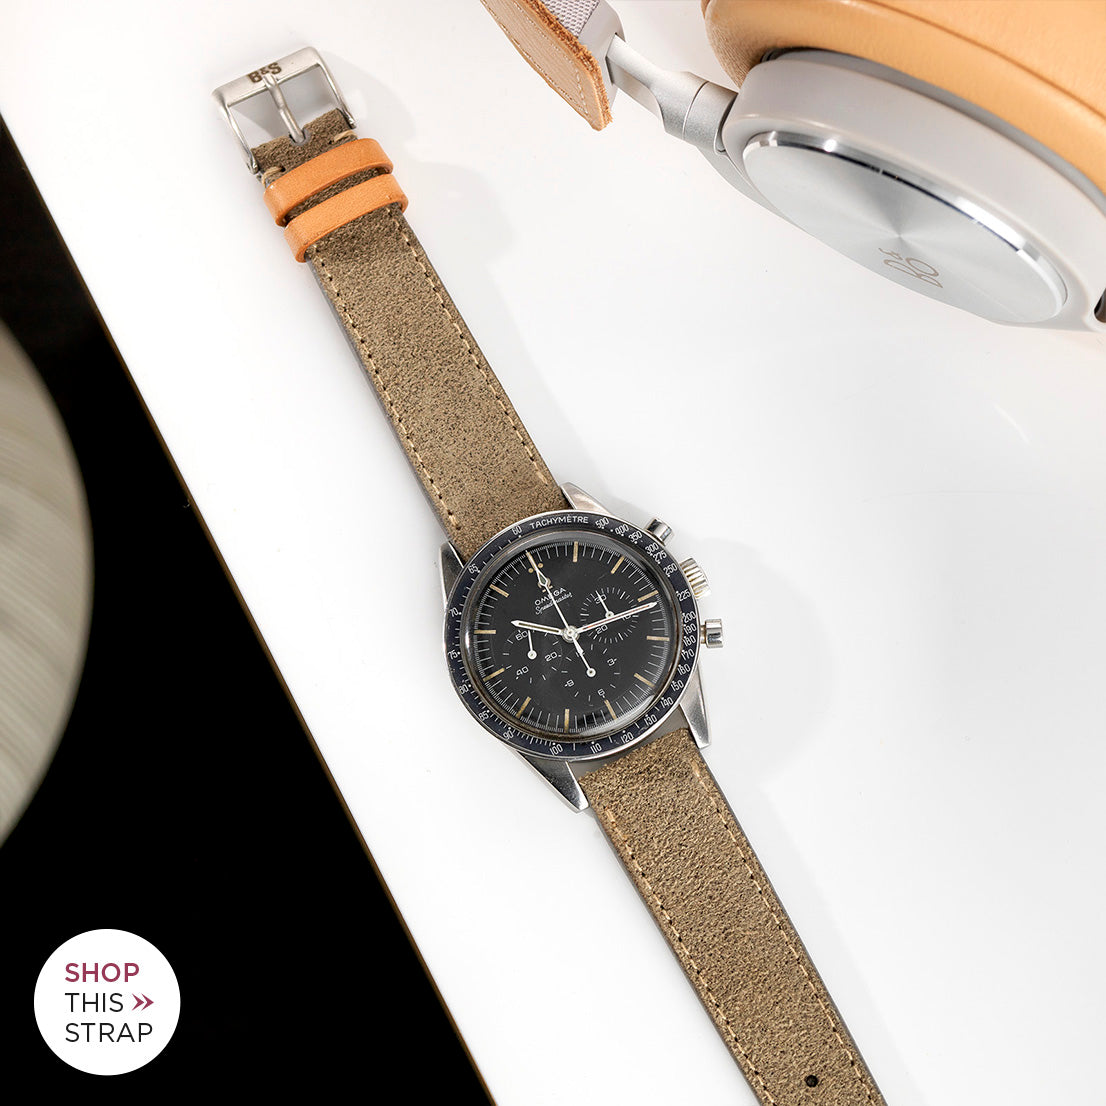 Bulang and Sons_Strap Guide_The Omega Straight Lugs speedmaster_Refined Rugged Grey Leather Watch Strap